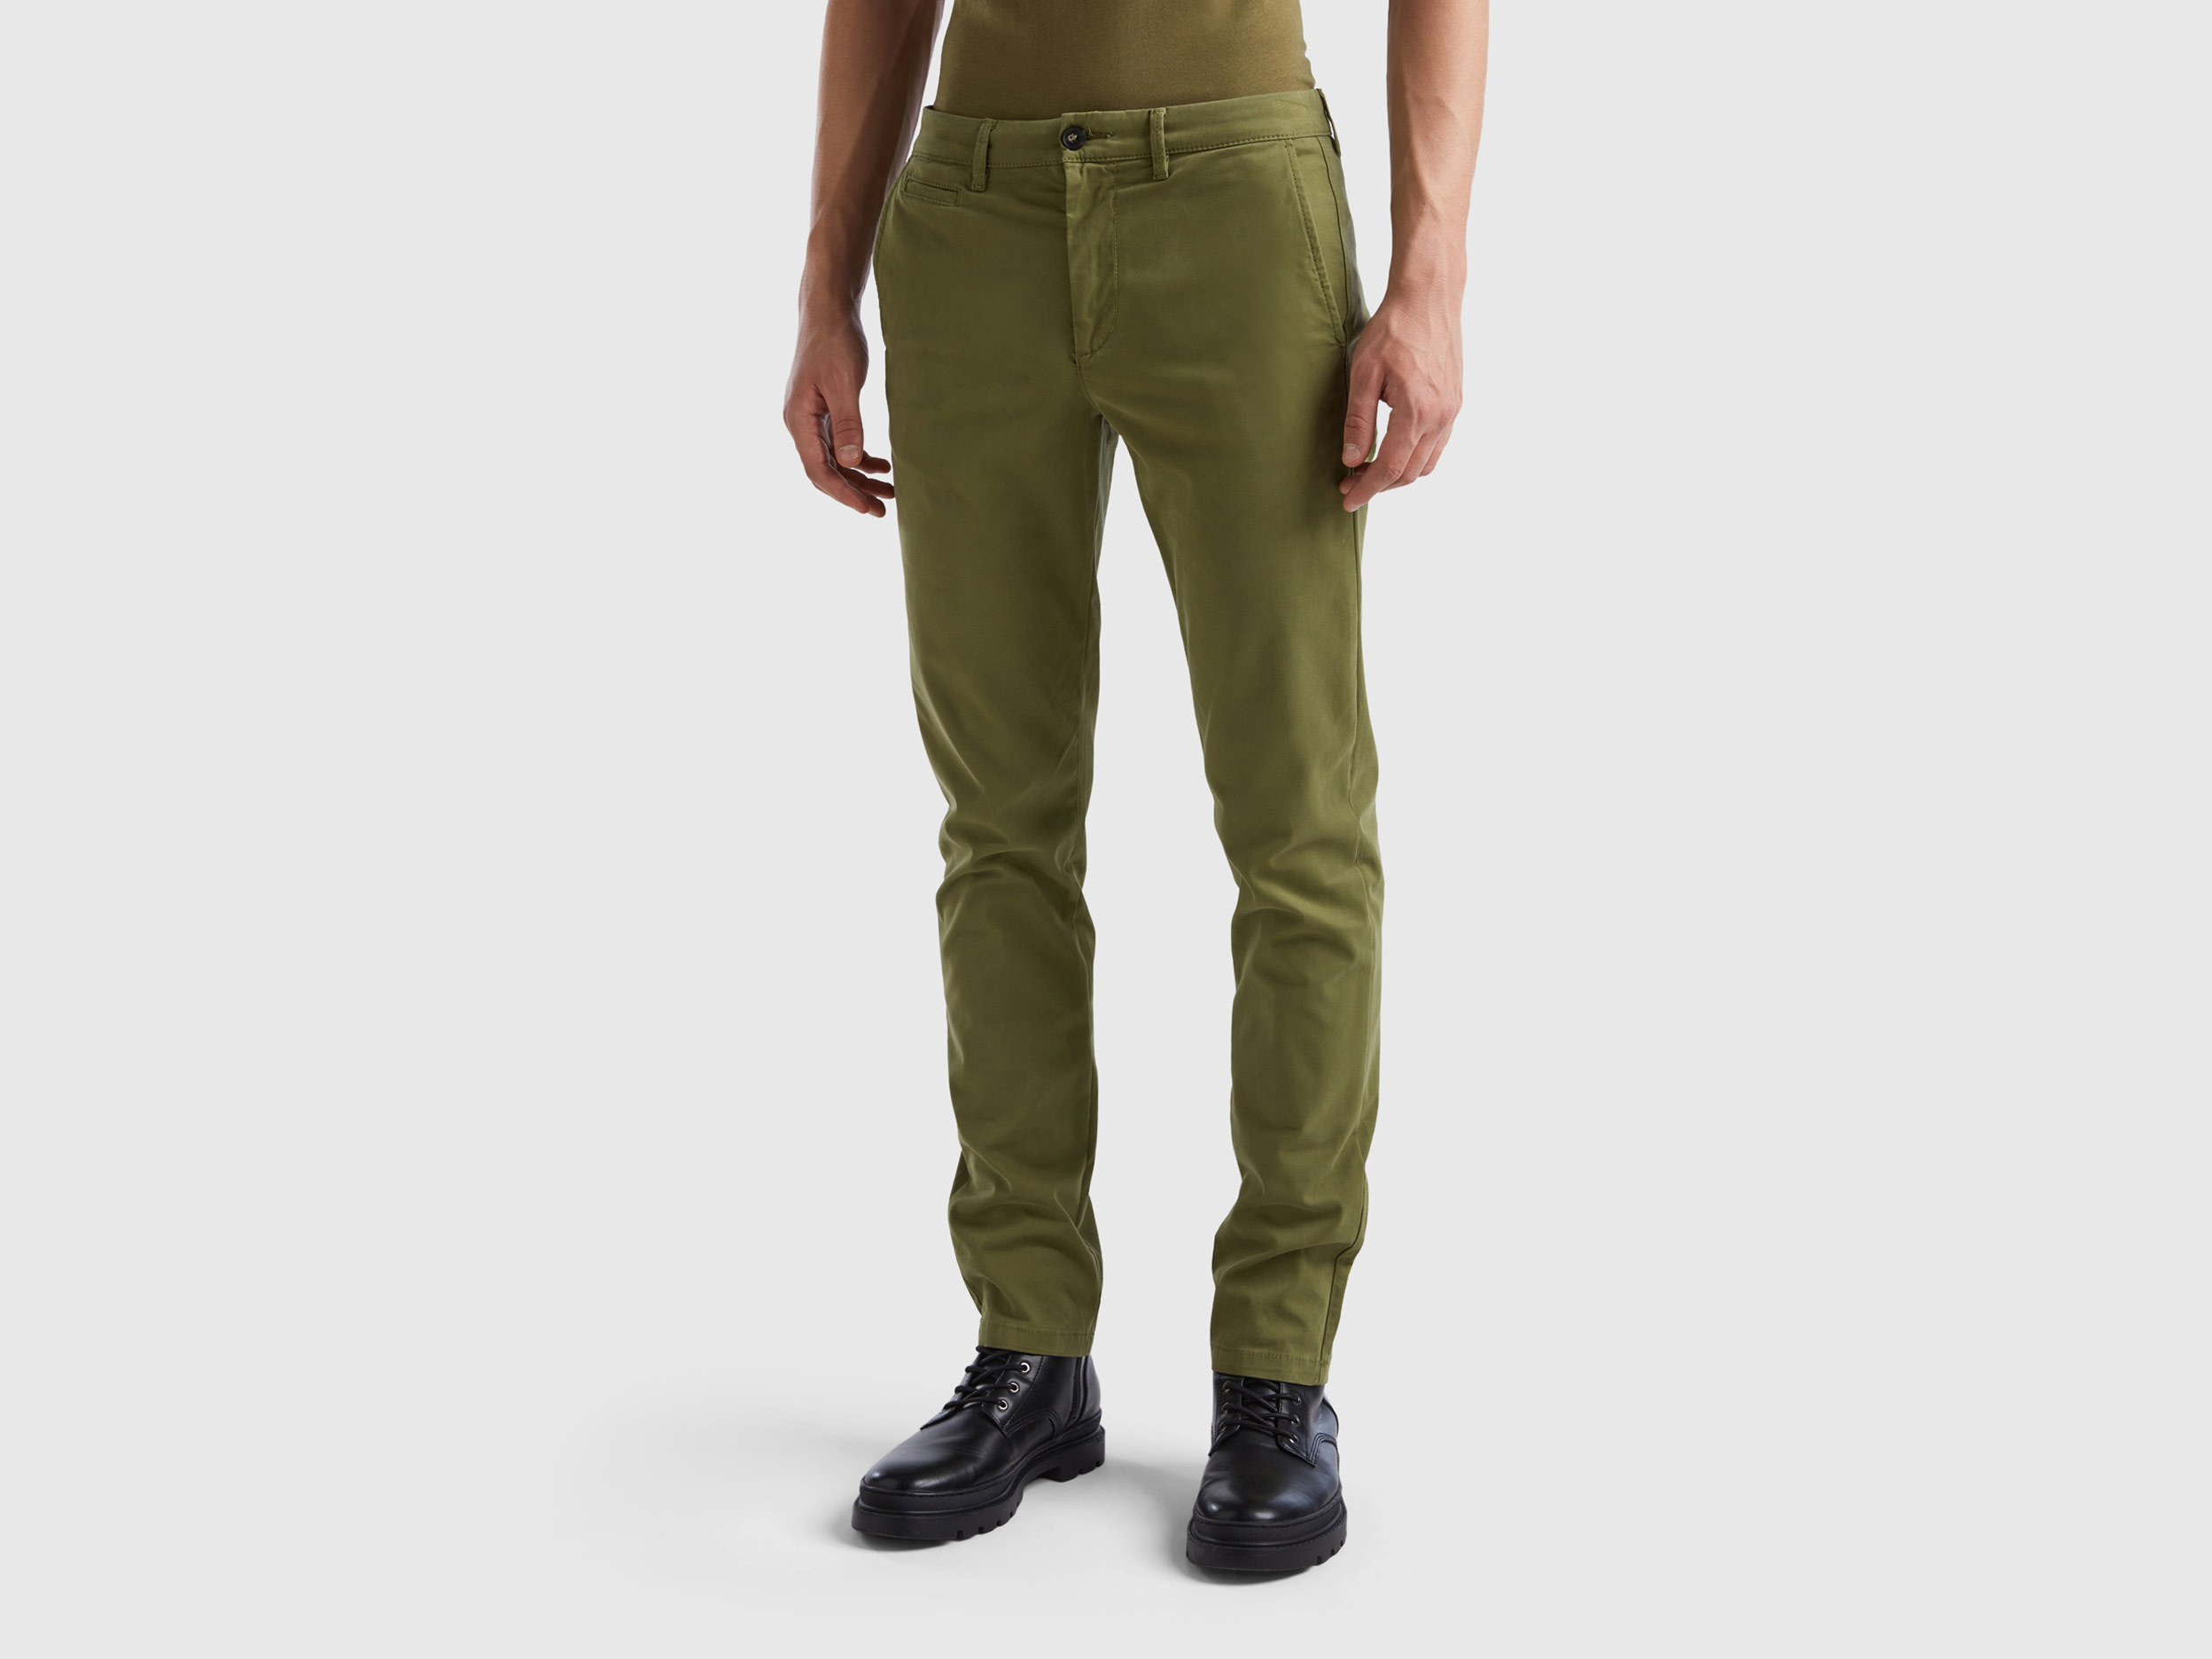 Benetton, Military Green Slim Fit Chinos, size 46, Military Green, Men